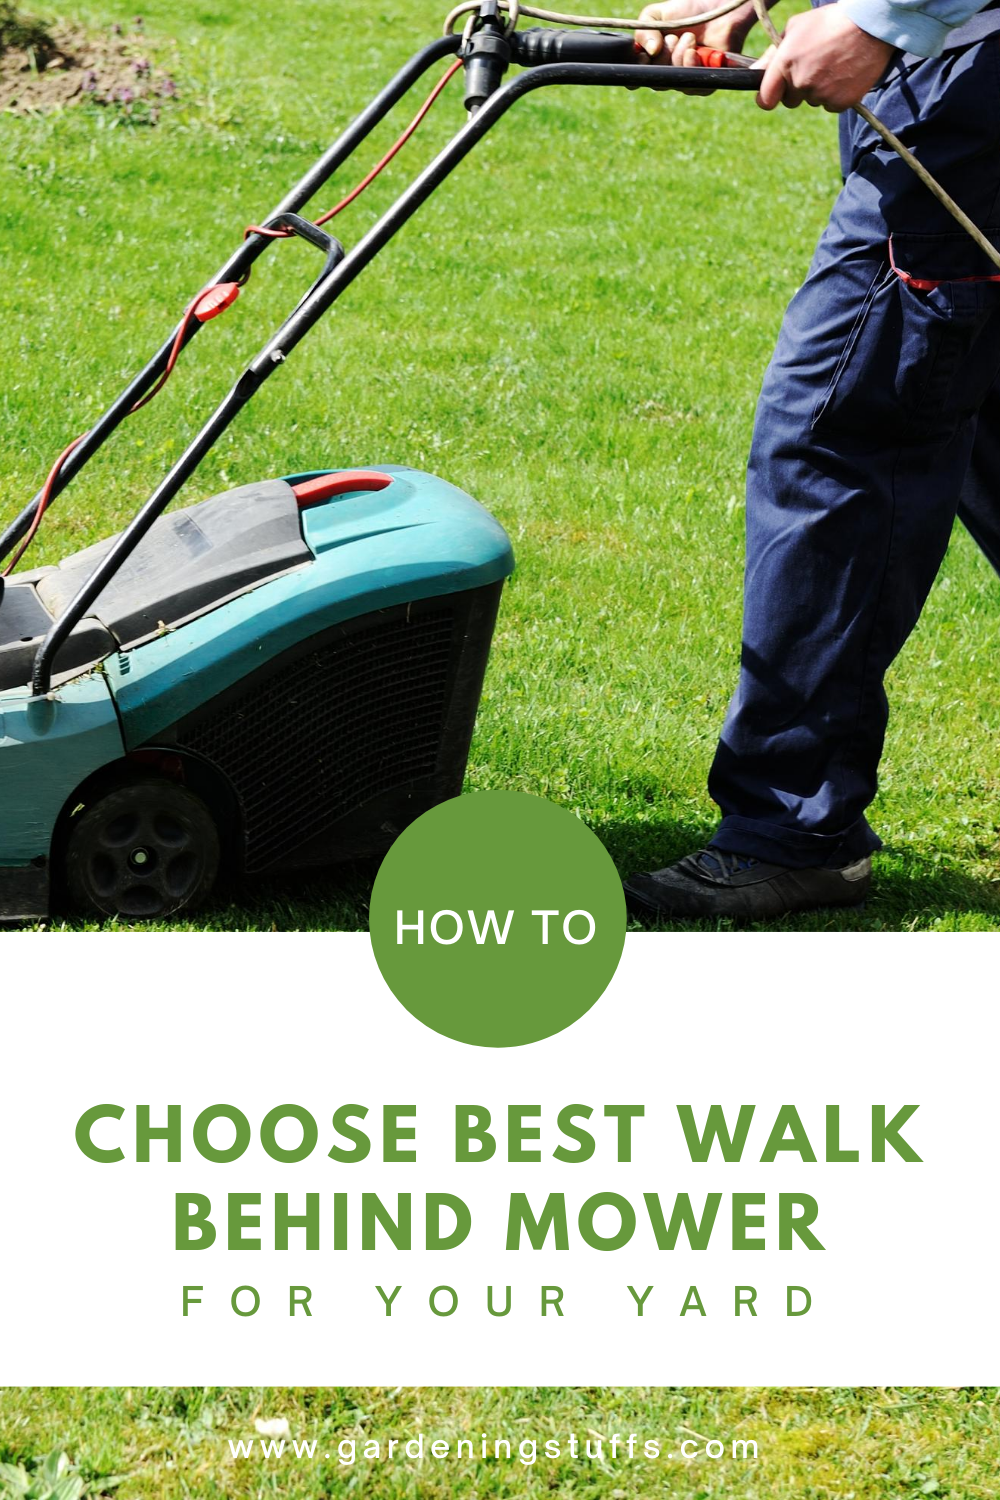 With walk-behind mowers, it will help you save time and energy. There are factors to consider to ensure that you will get the functionality that you need and want for a lawn mower. Read on how to choose the best walk-behind mower for your yard.